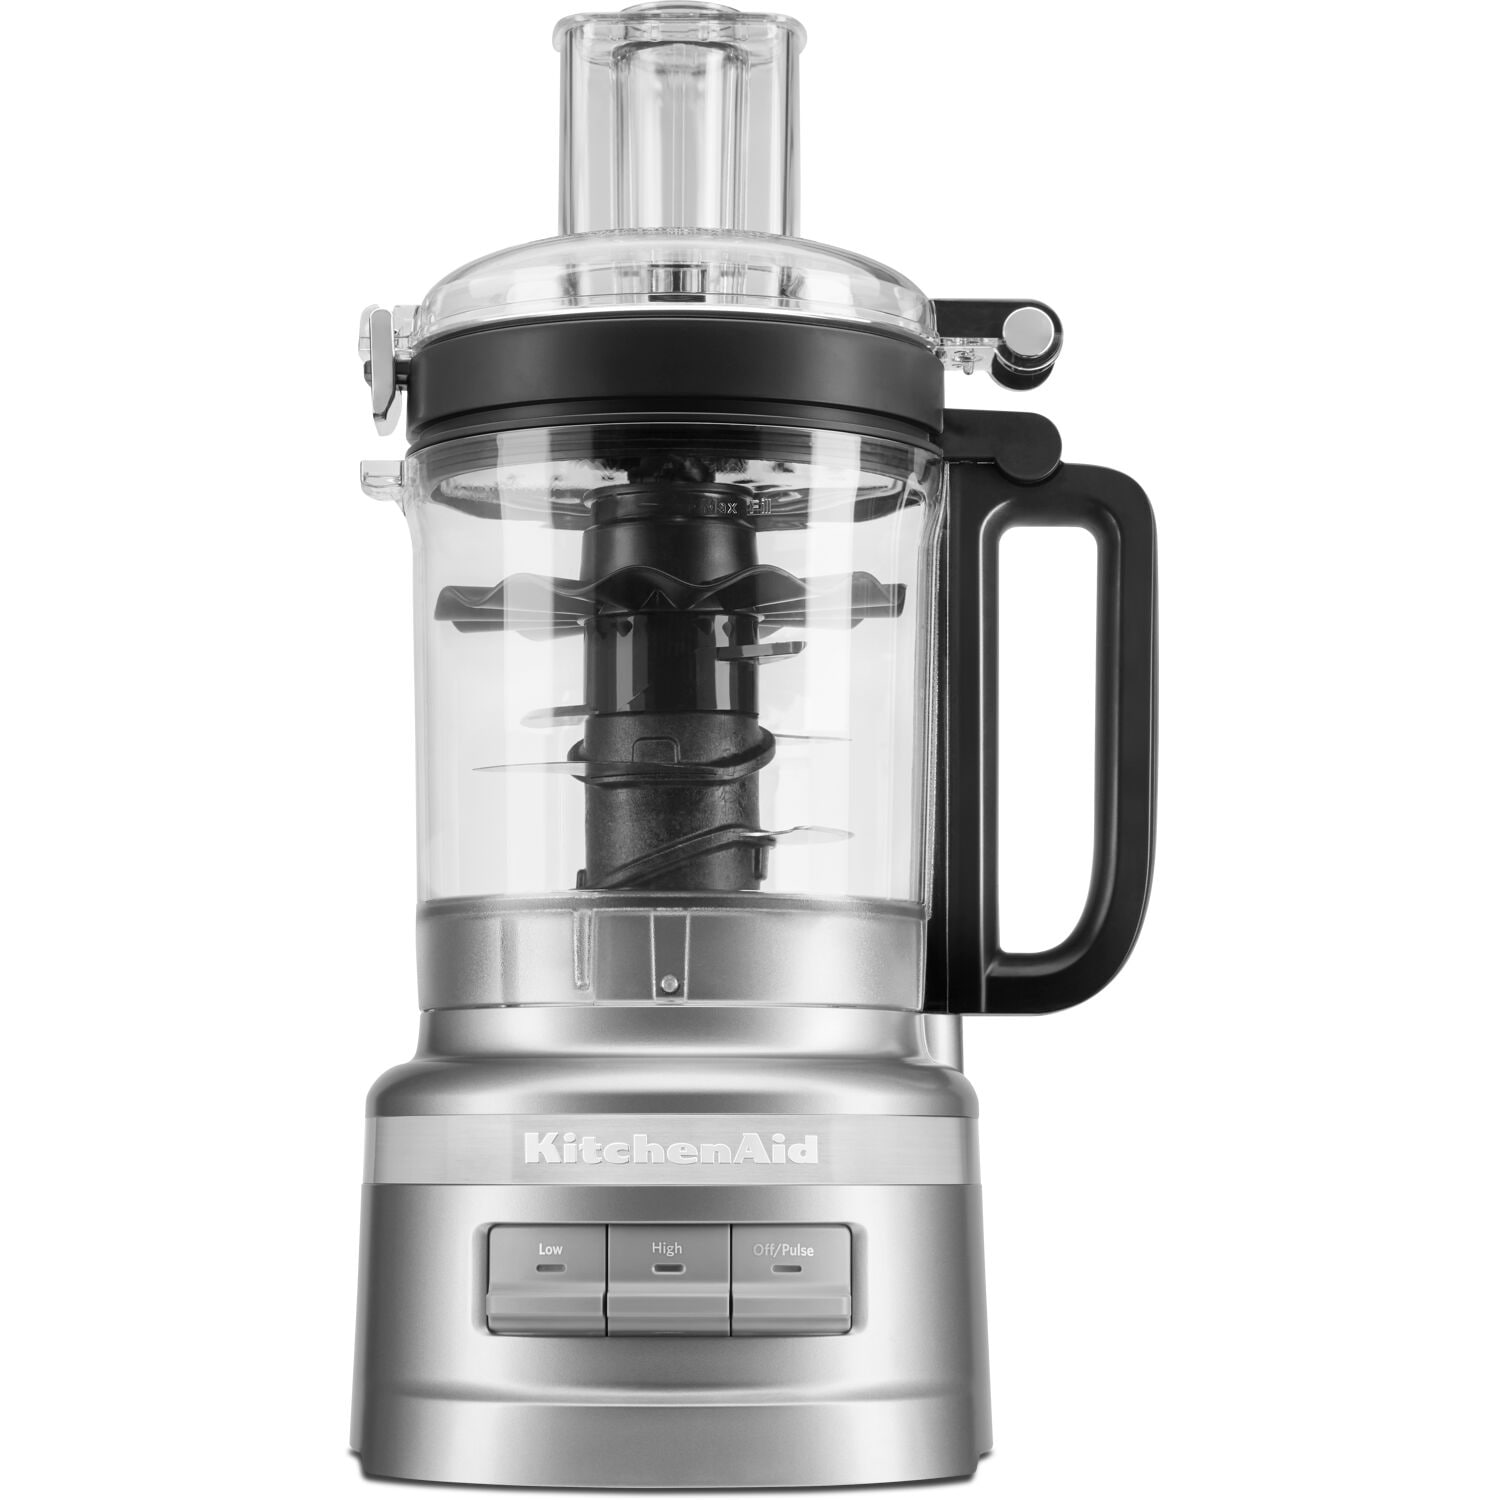 https://ak1.ostkcdn.com/images/products/is/images/direct/4648b35832094db79c3e7dede2a0be39ff092350/KitchenAid-9-Cup-Food-Processor-in-Contour-Silver.jpg